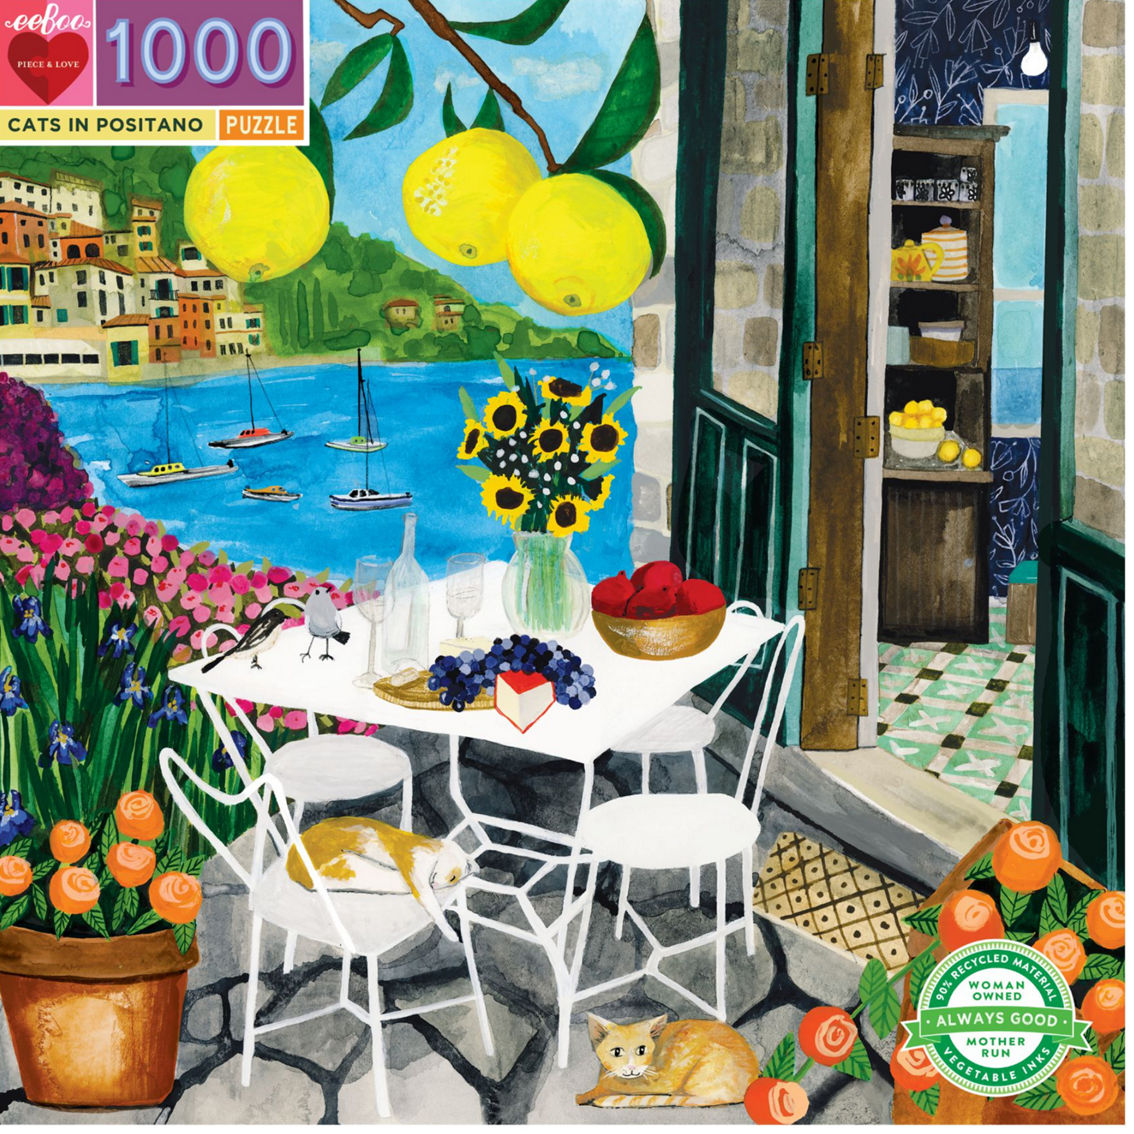 eeBoo Piece and Love Cats in Positano 1000 pc. Square Puzzle - Image 3 of 3